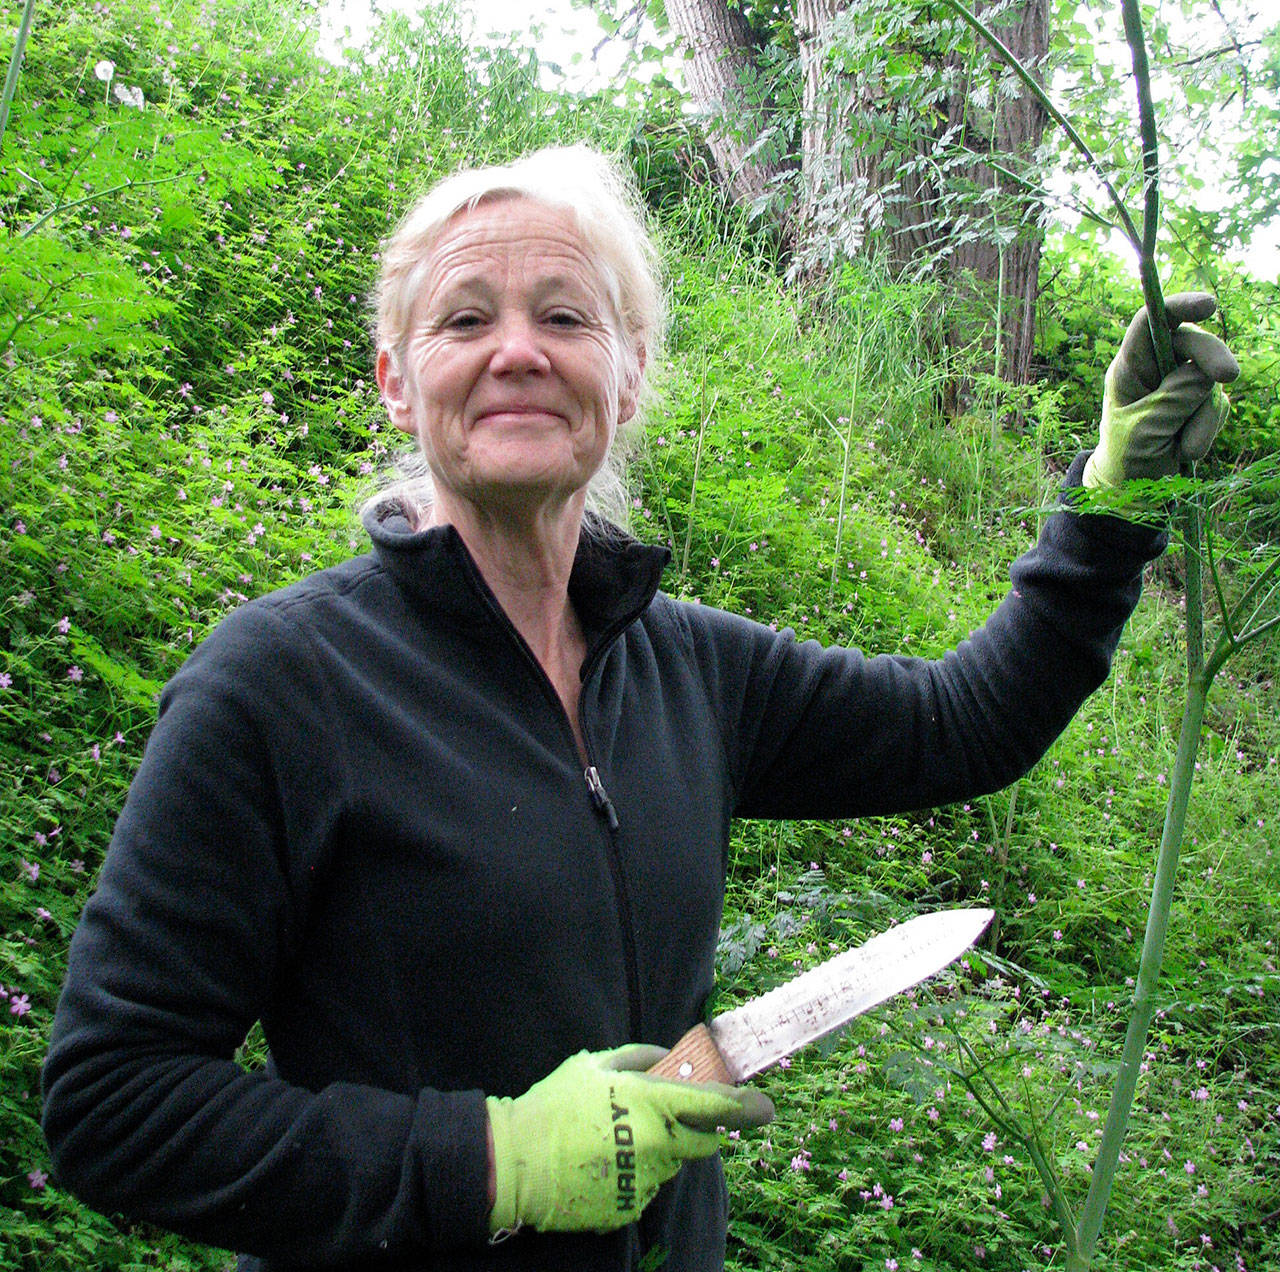 Cathy Lucero presents “Poisonous Plants for People and Pets” at the next Green Thumbs Garden Tips session, set for June 13 in Port Angeles. Lucero is the Clallam County Noxious Weed Control Coordinator. Photo by Amanda Rosenberg